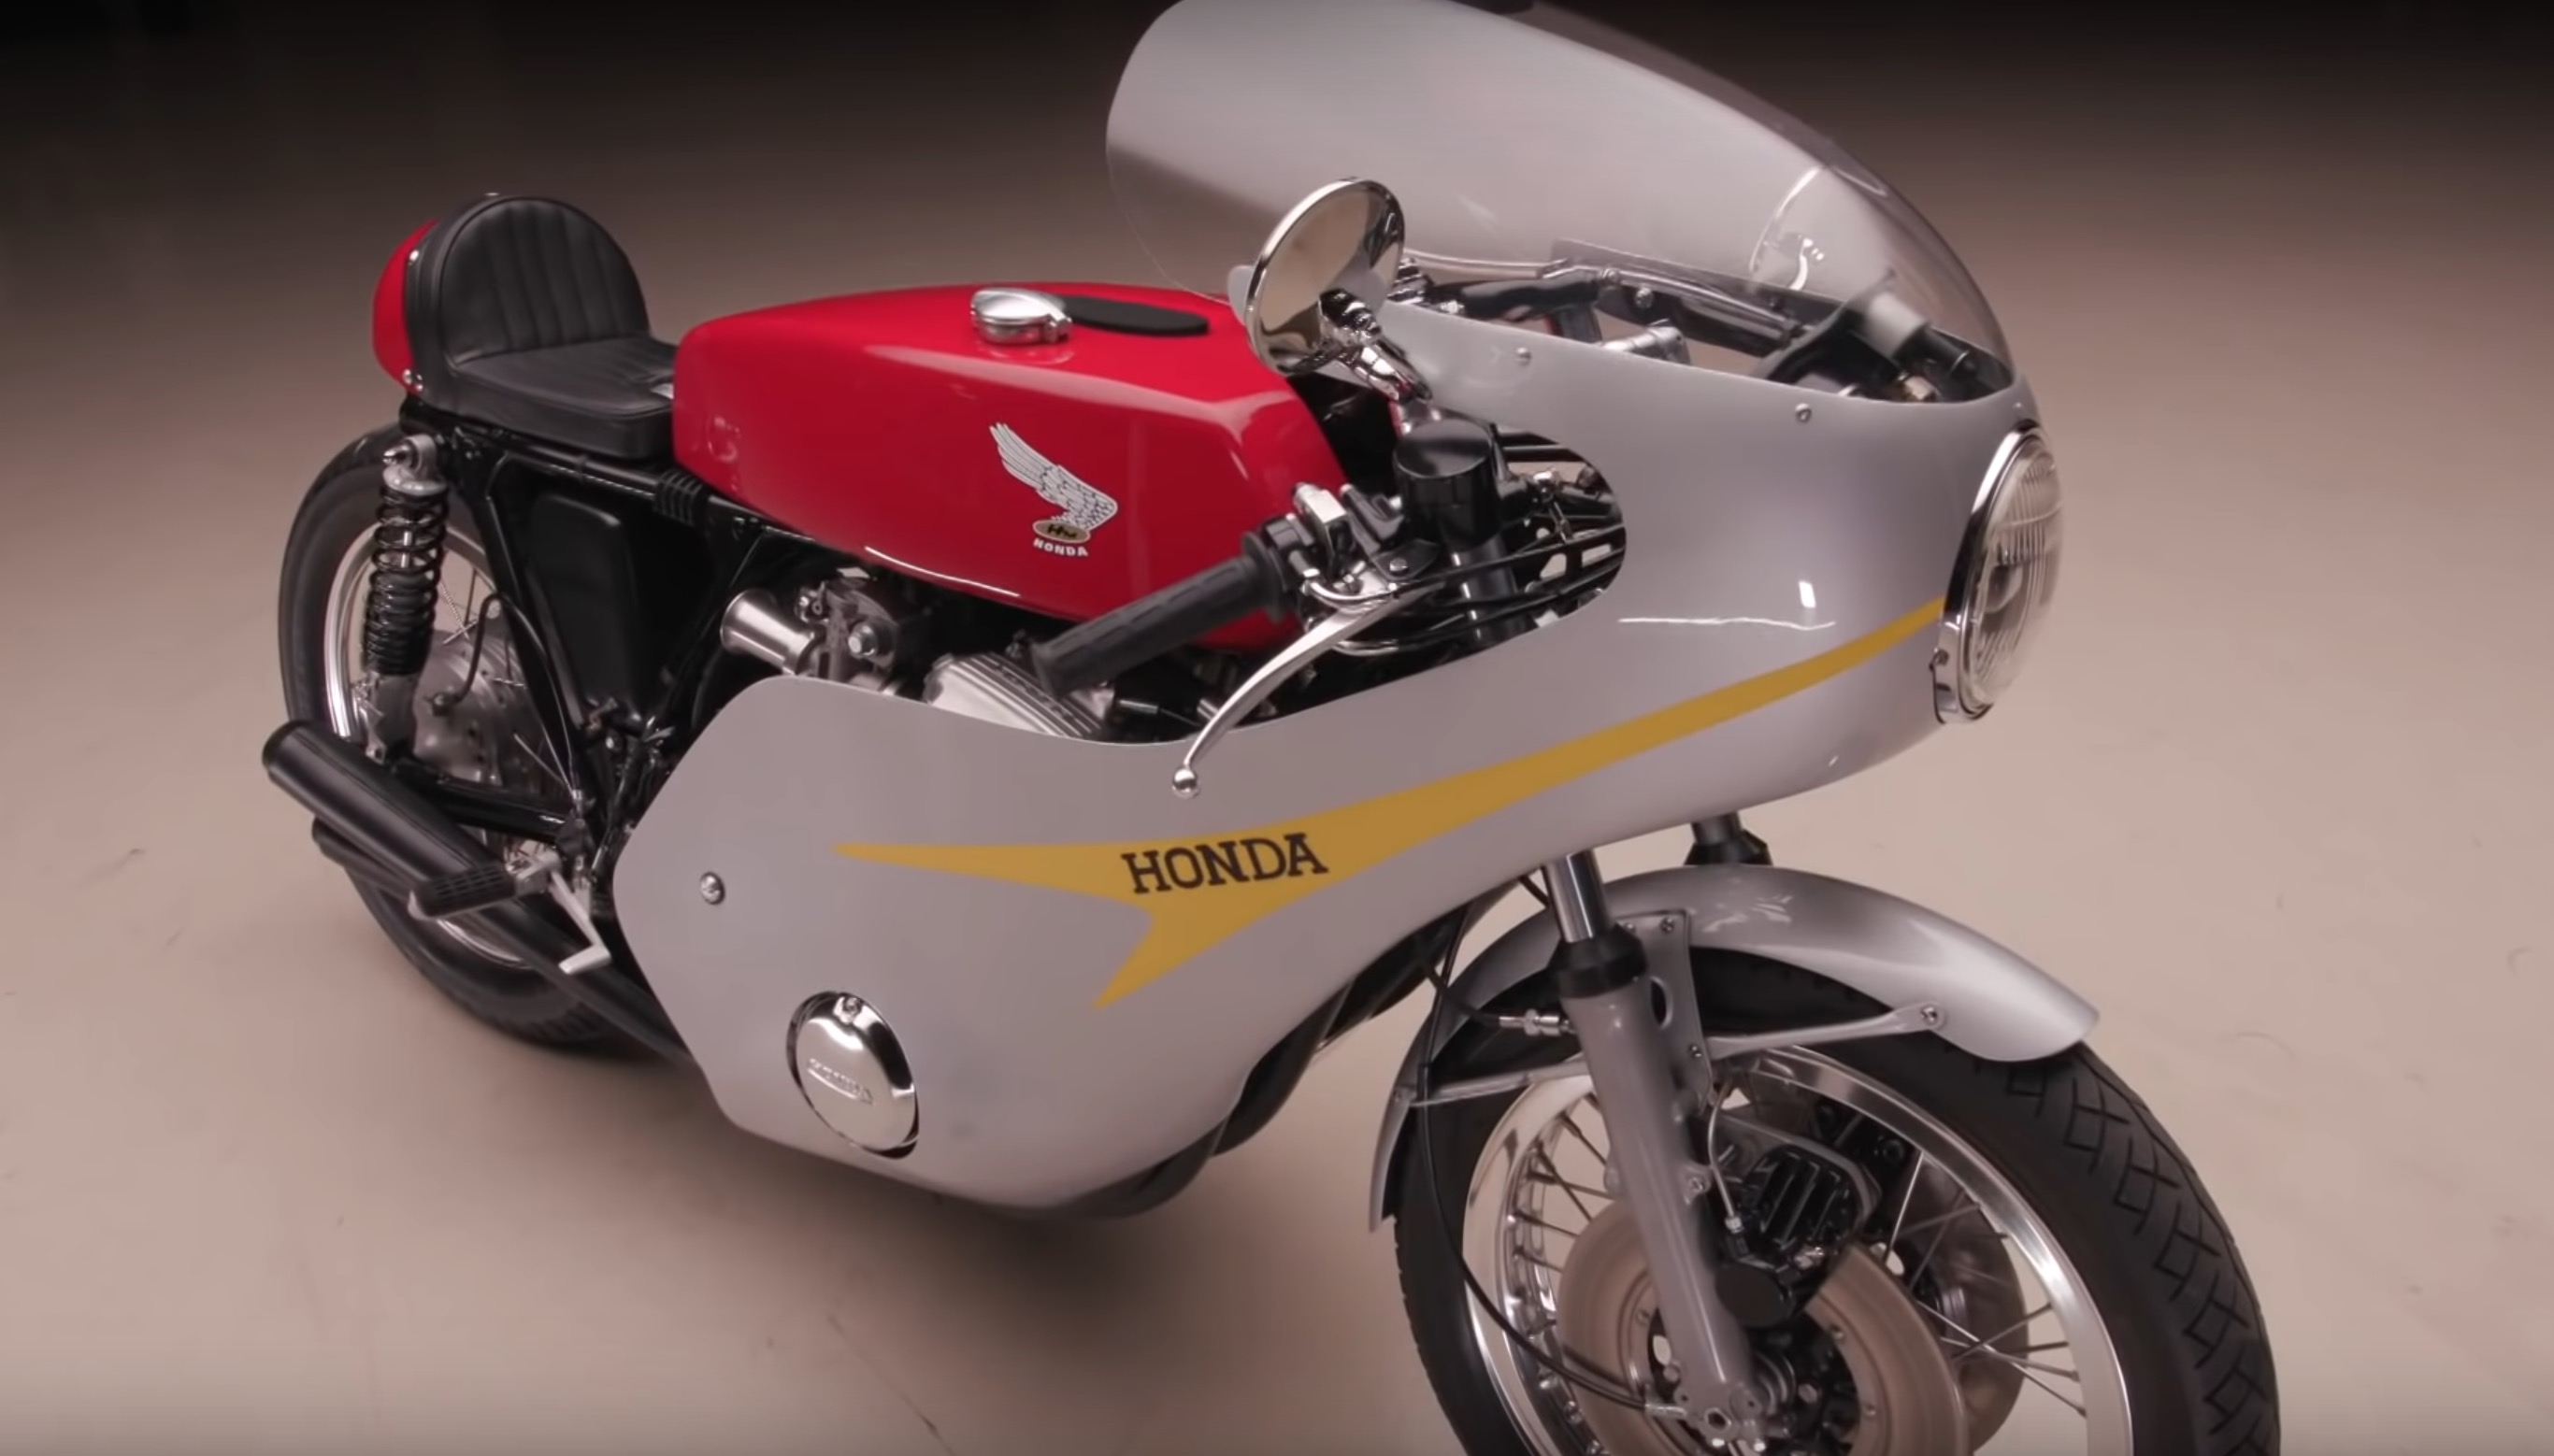 VIDEO This Honda CR750 channels 60 years of racing bikes Japanese